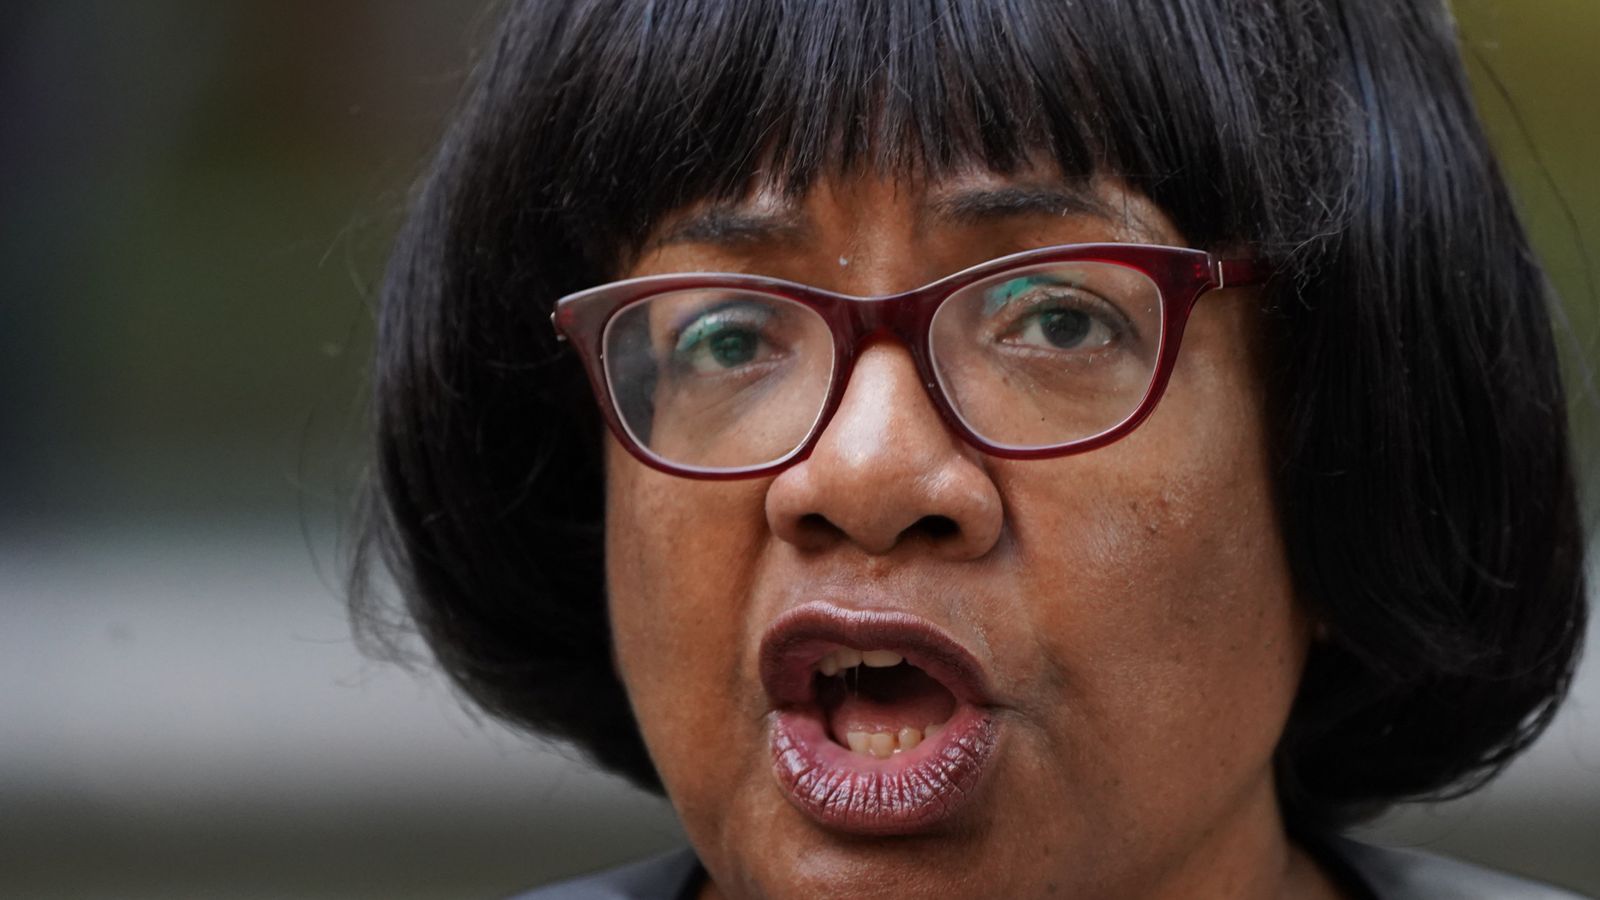 Diane Abbott says she will stand in Hackney 'by any means possible'